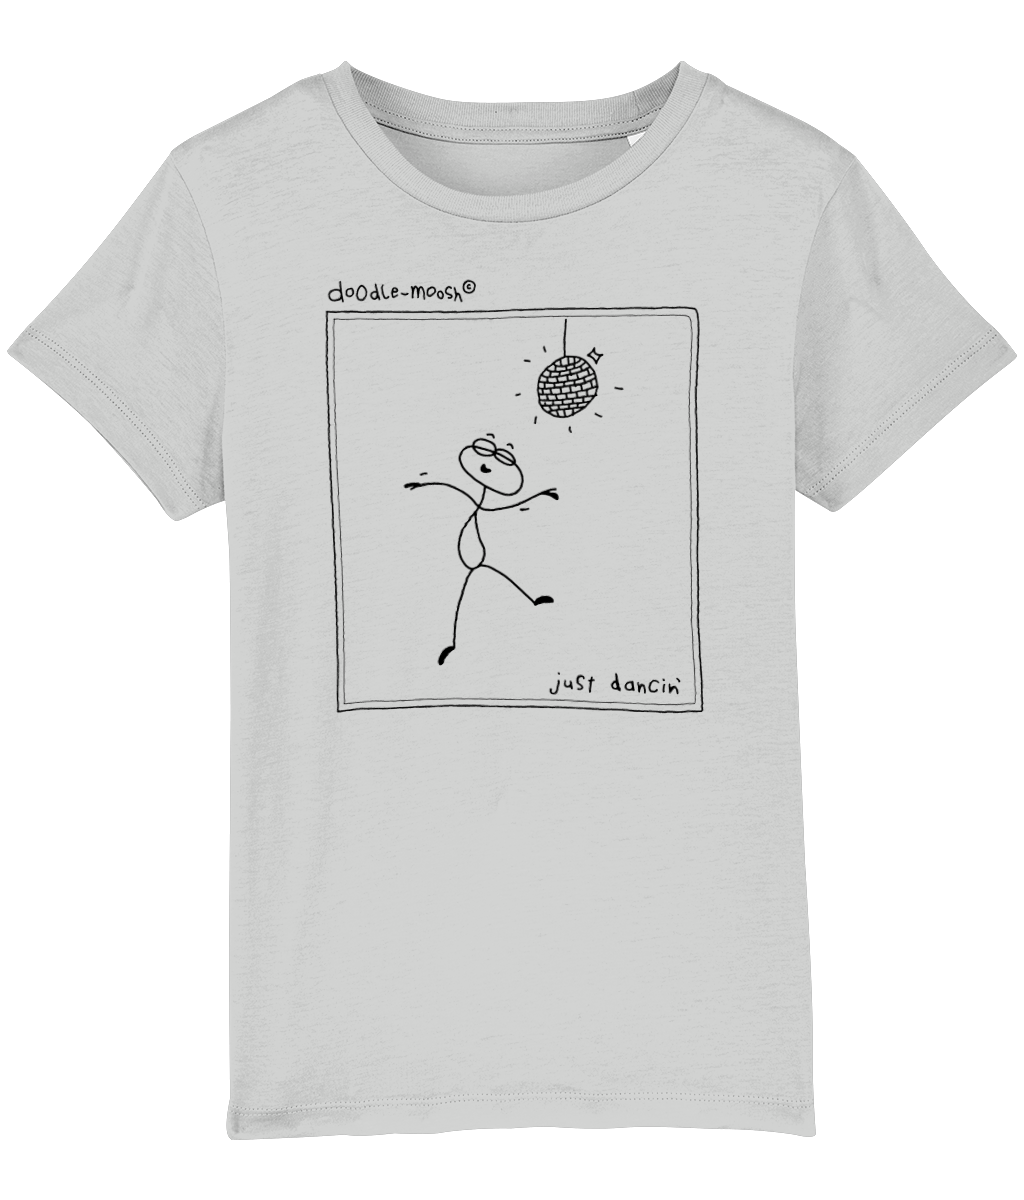 Just dancing t-shirt, grey with black